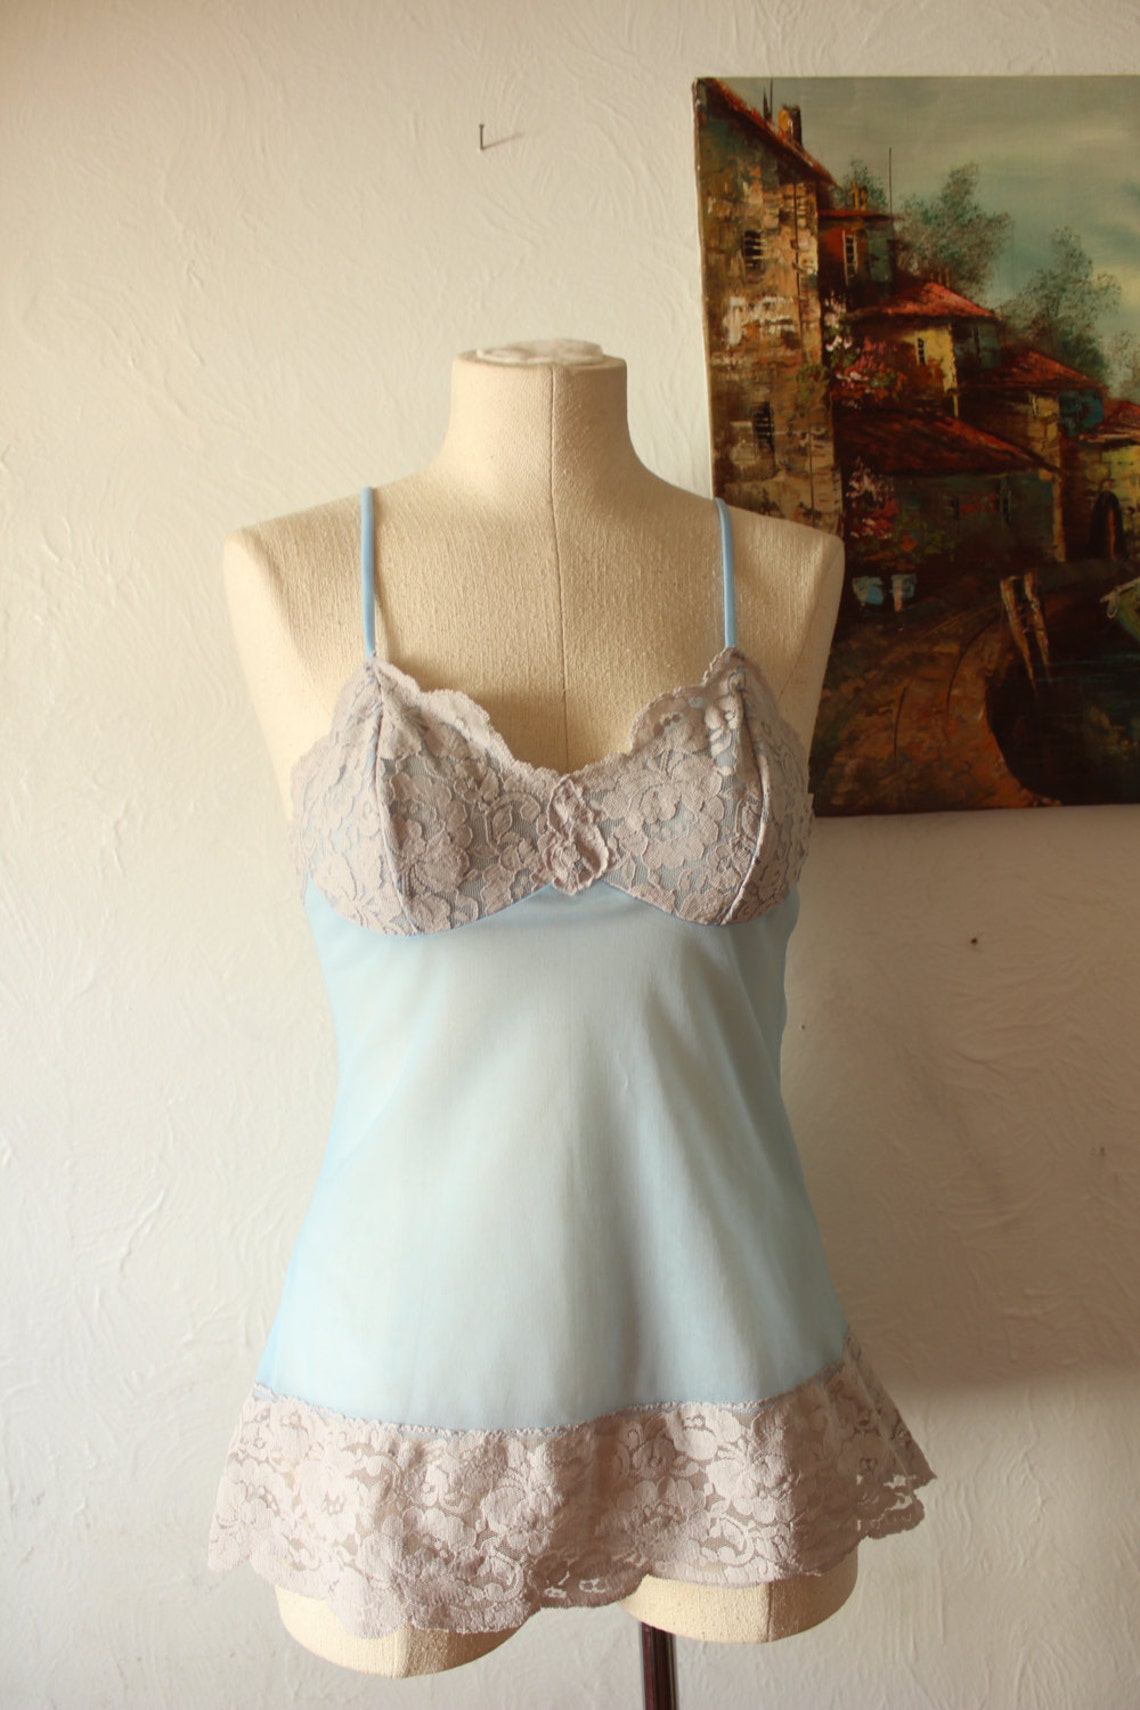 Vintage Pale Blue and Lace Camisole. Chiffon Sheer Cami | Etsy